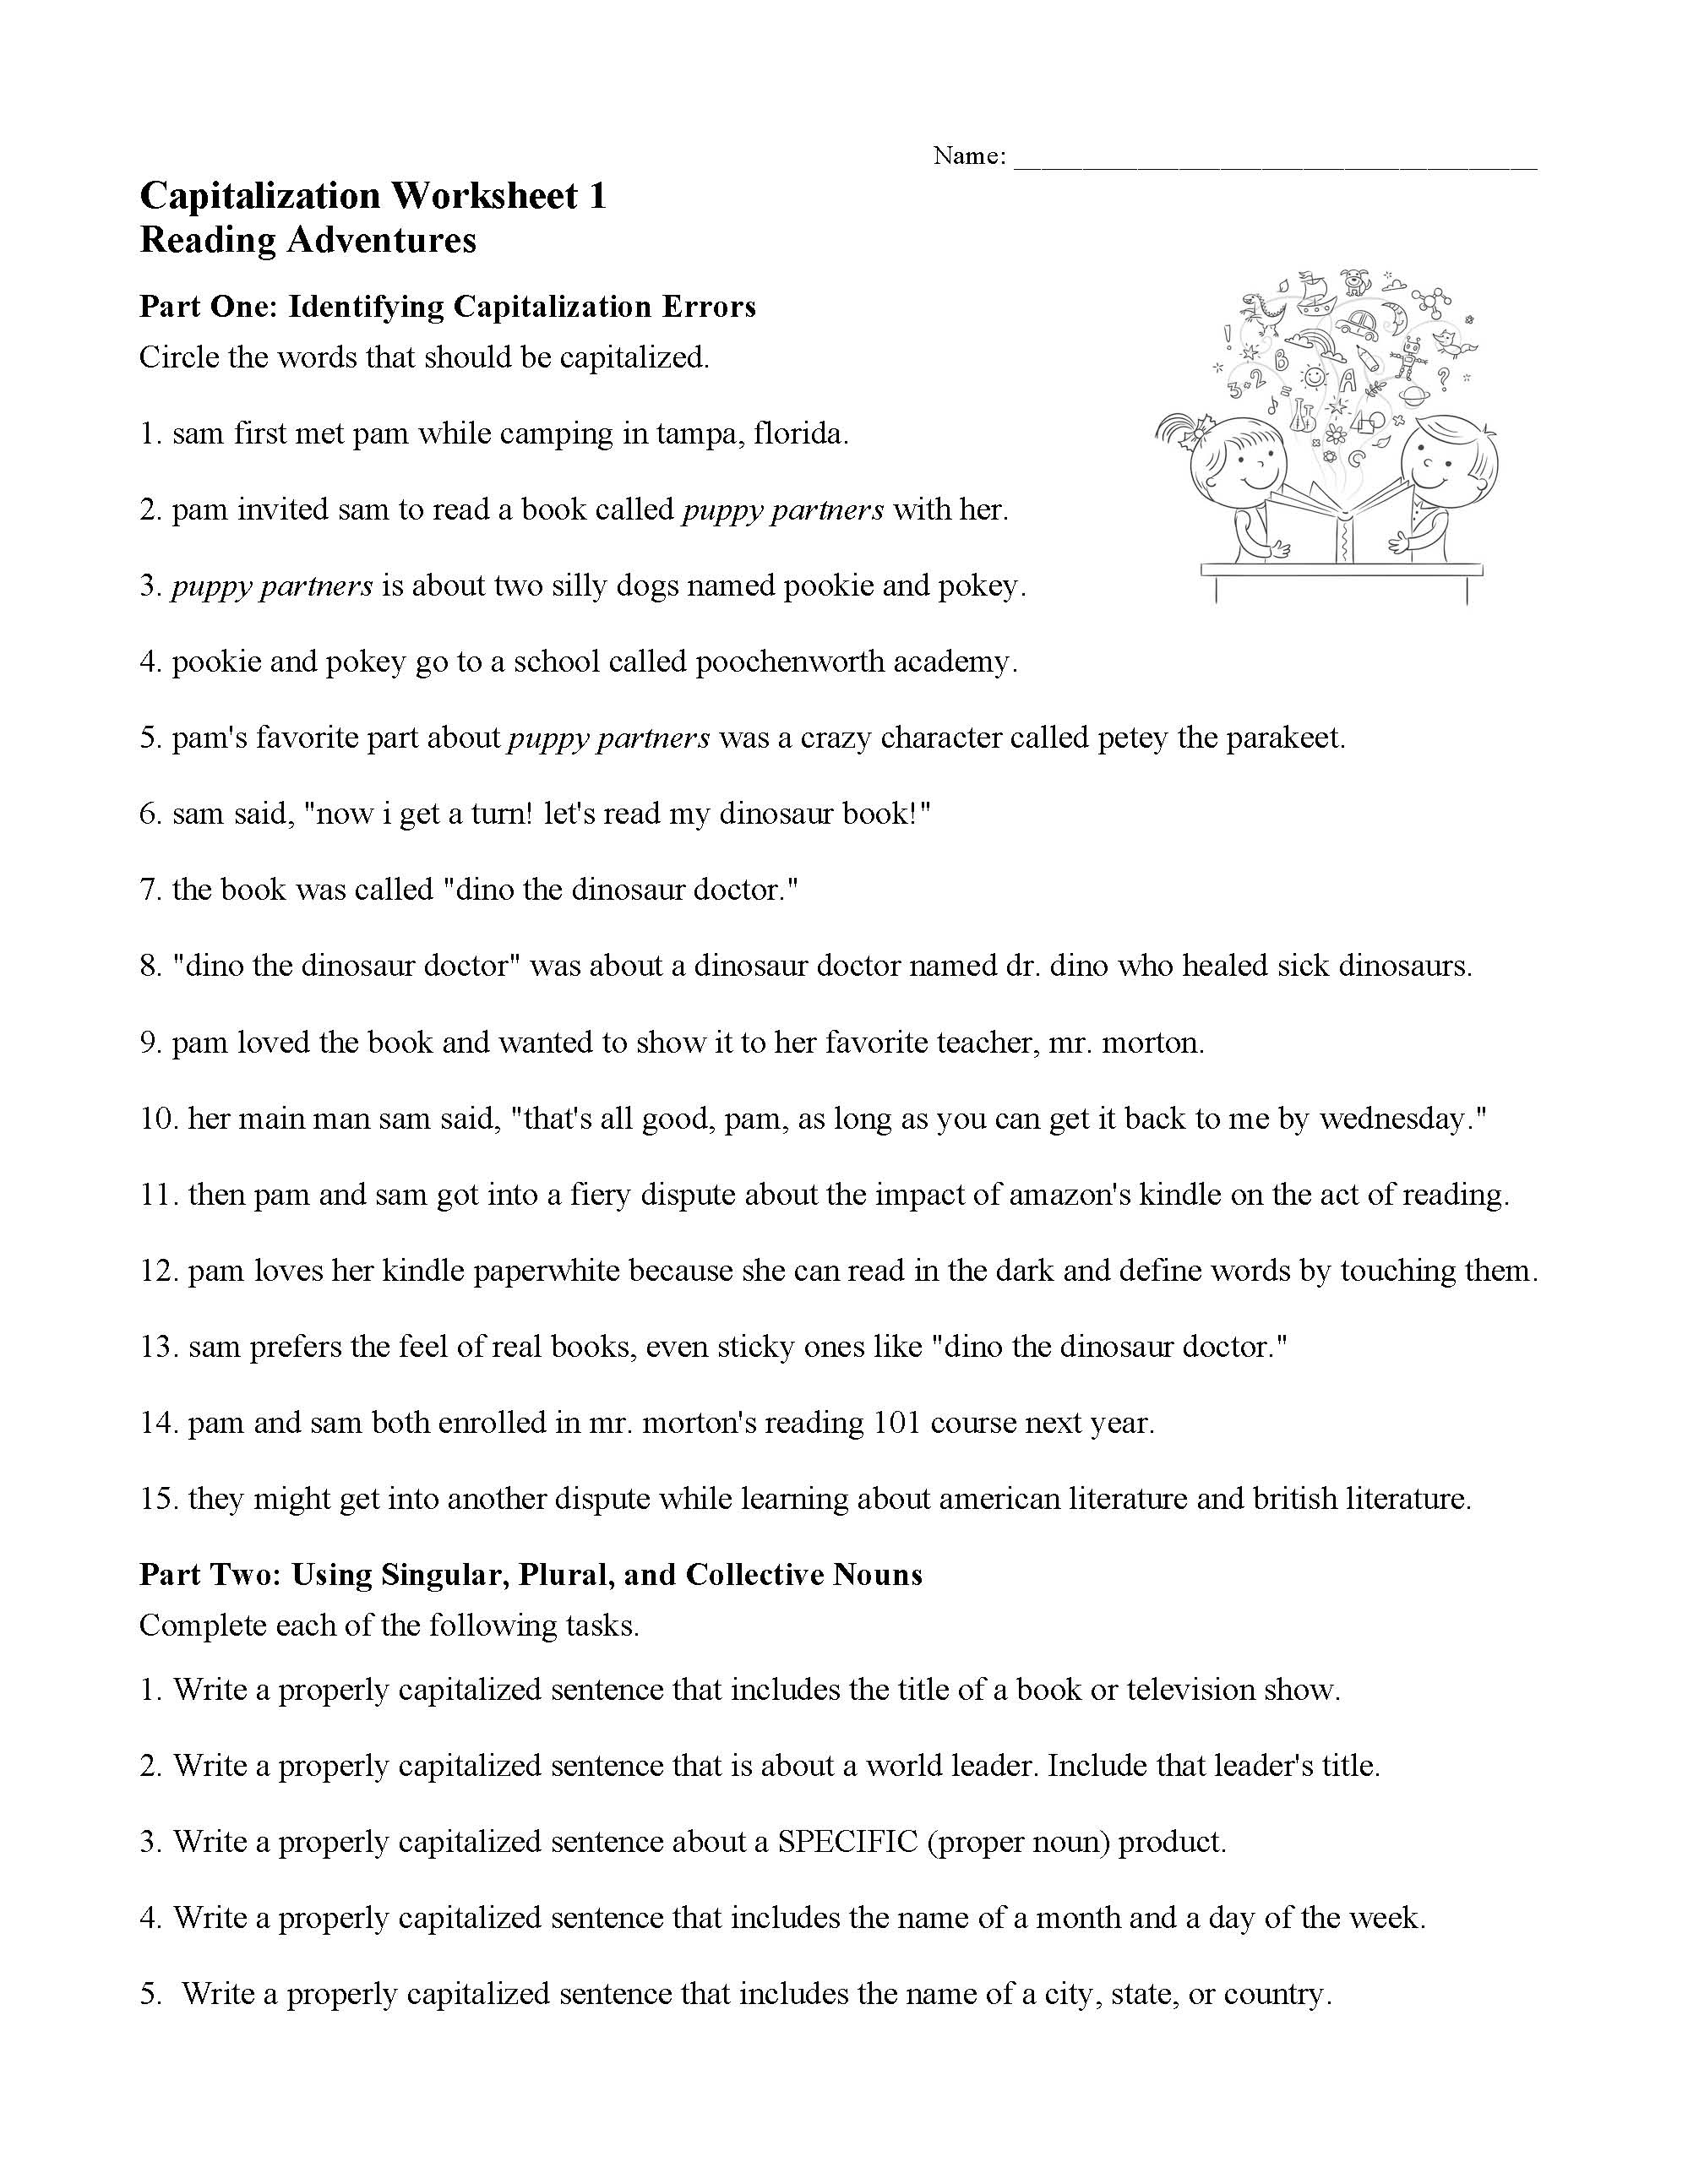 This is a preview image of Capitalization Worksheet 1. Click on it to enlarge it or view the source file.